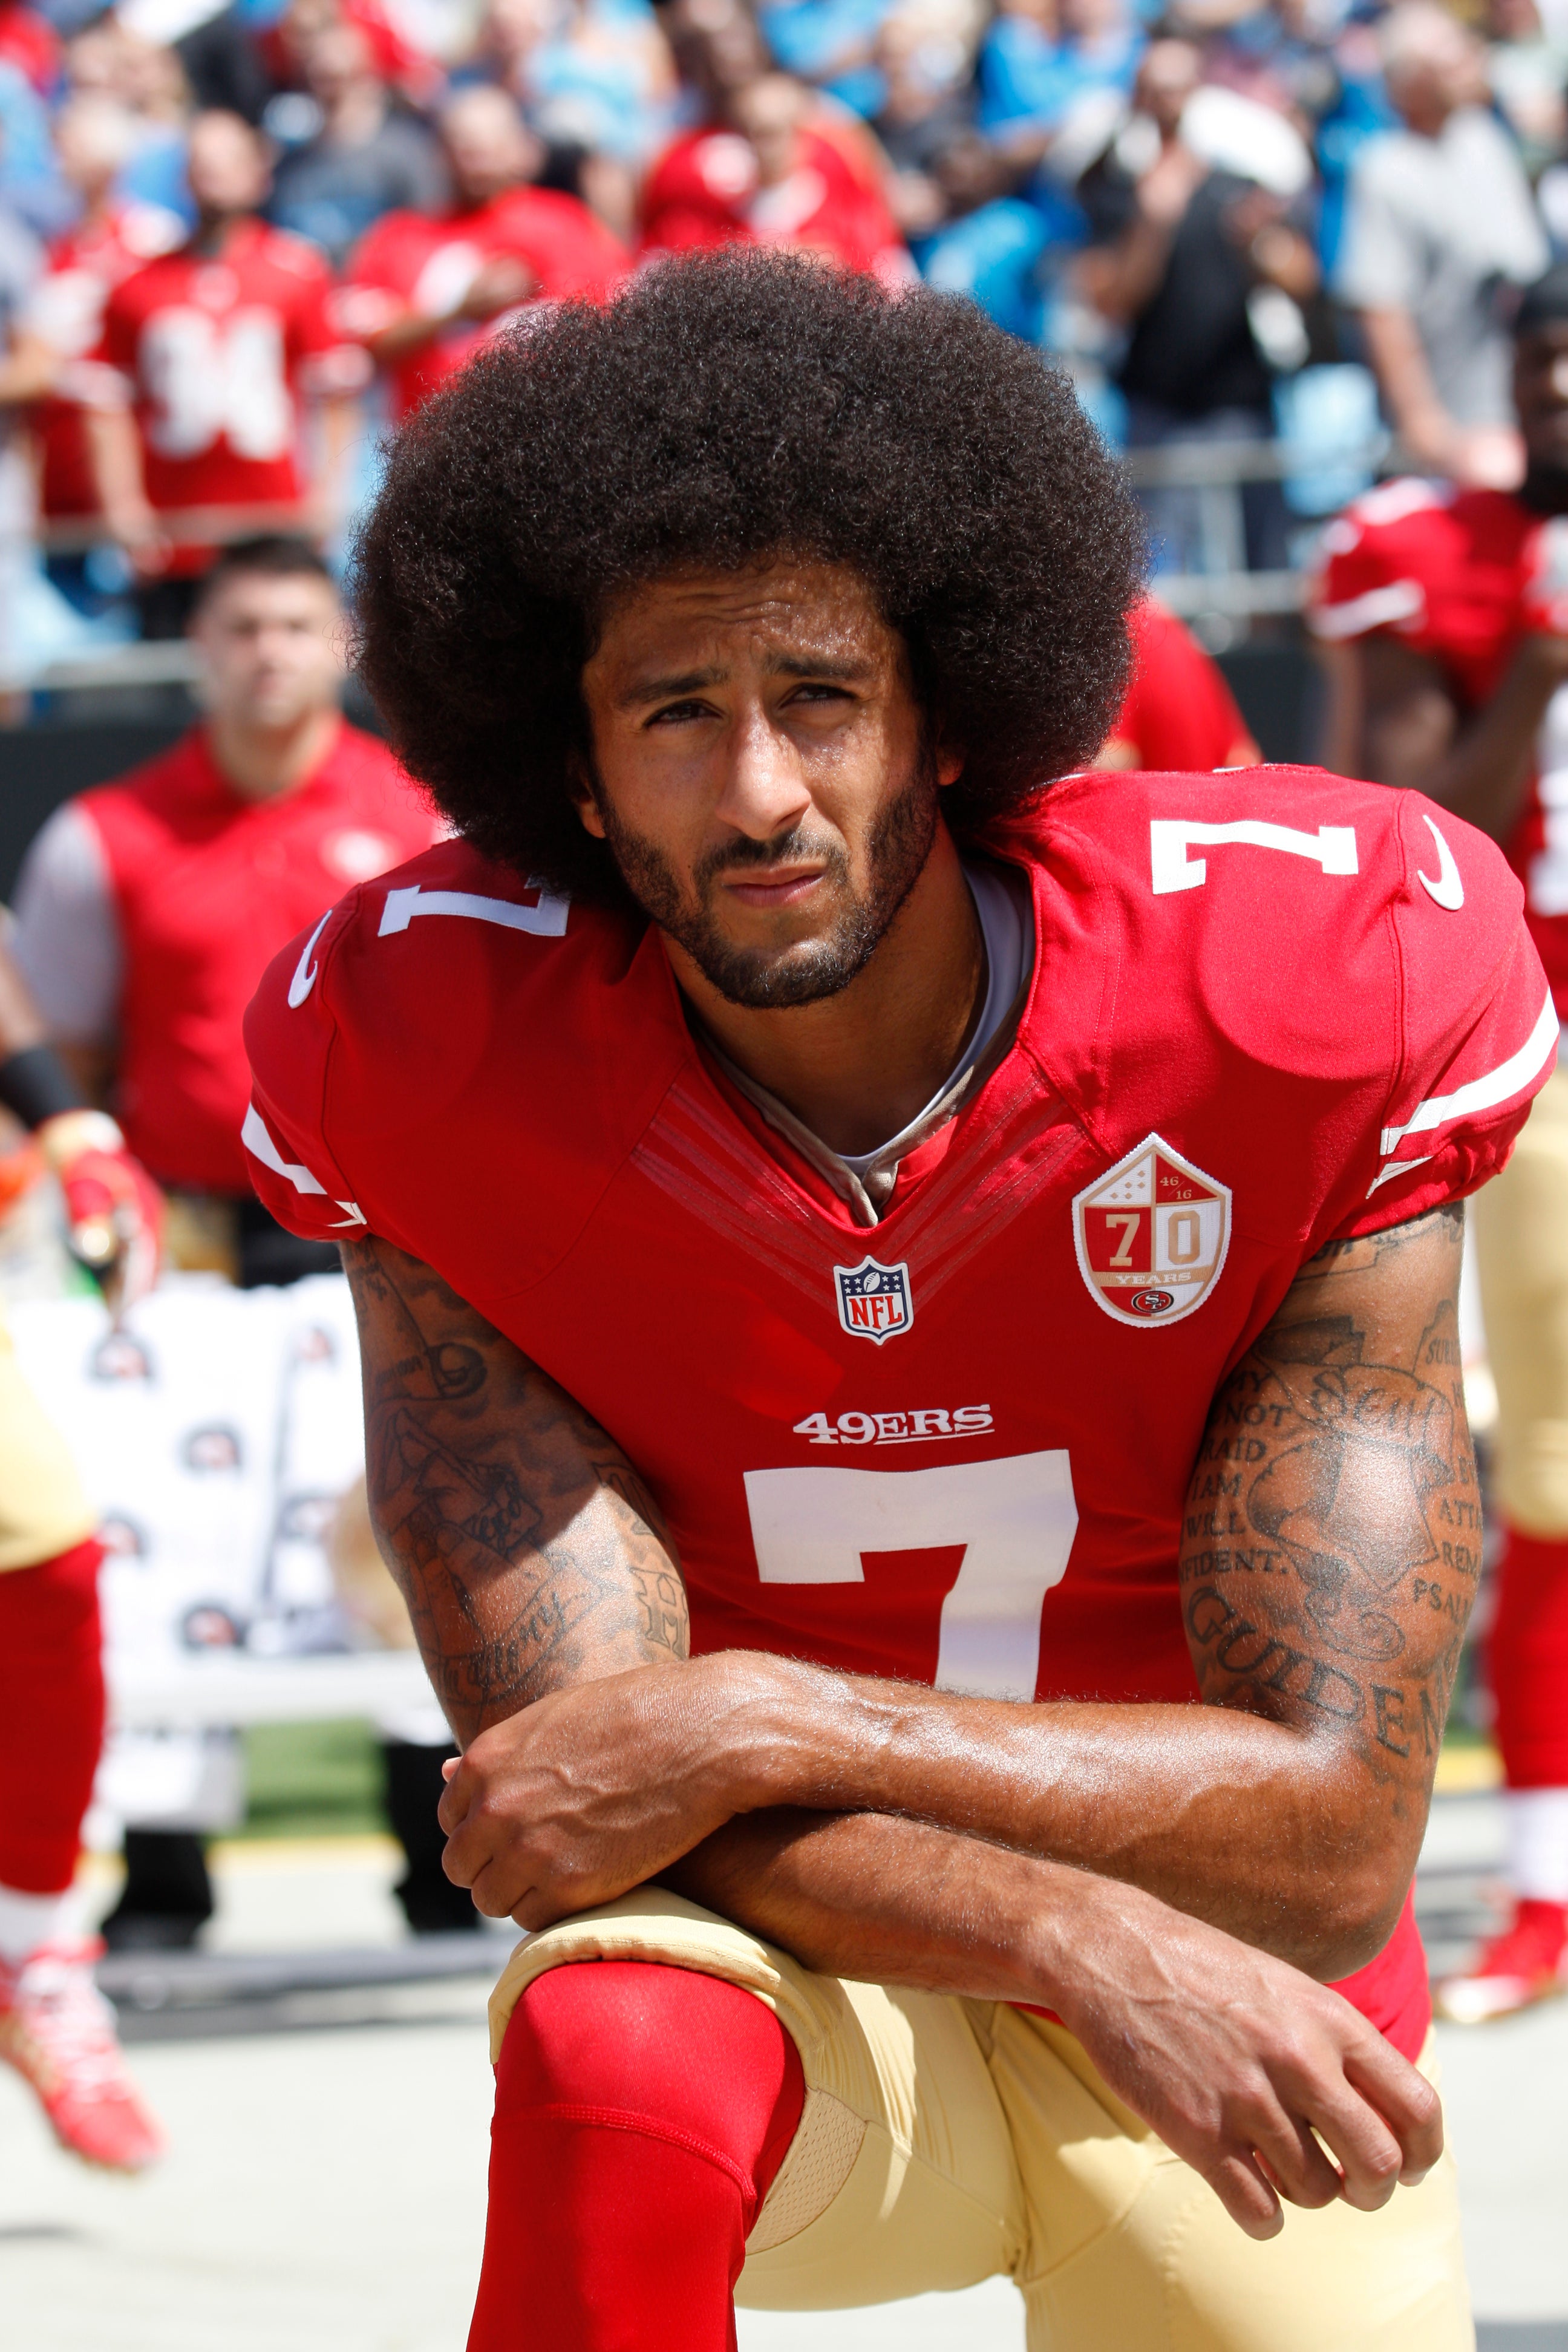 Colin Kaepernick Responds To Trump By Donating $50,000 To Meals On Wheels 
